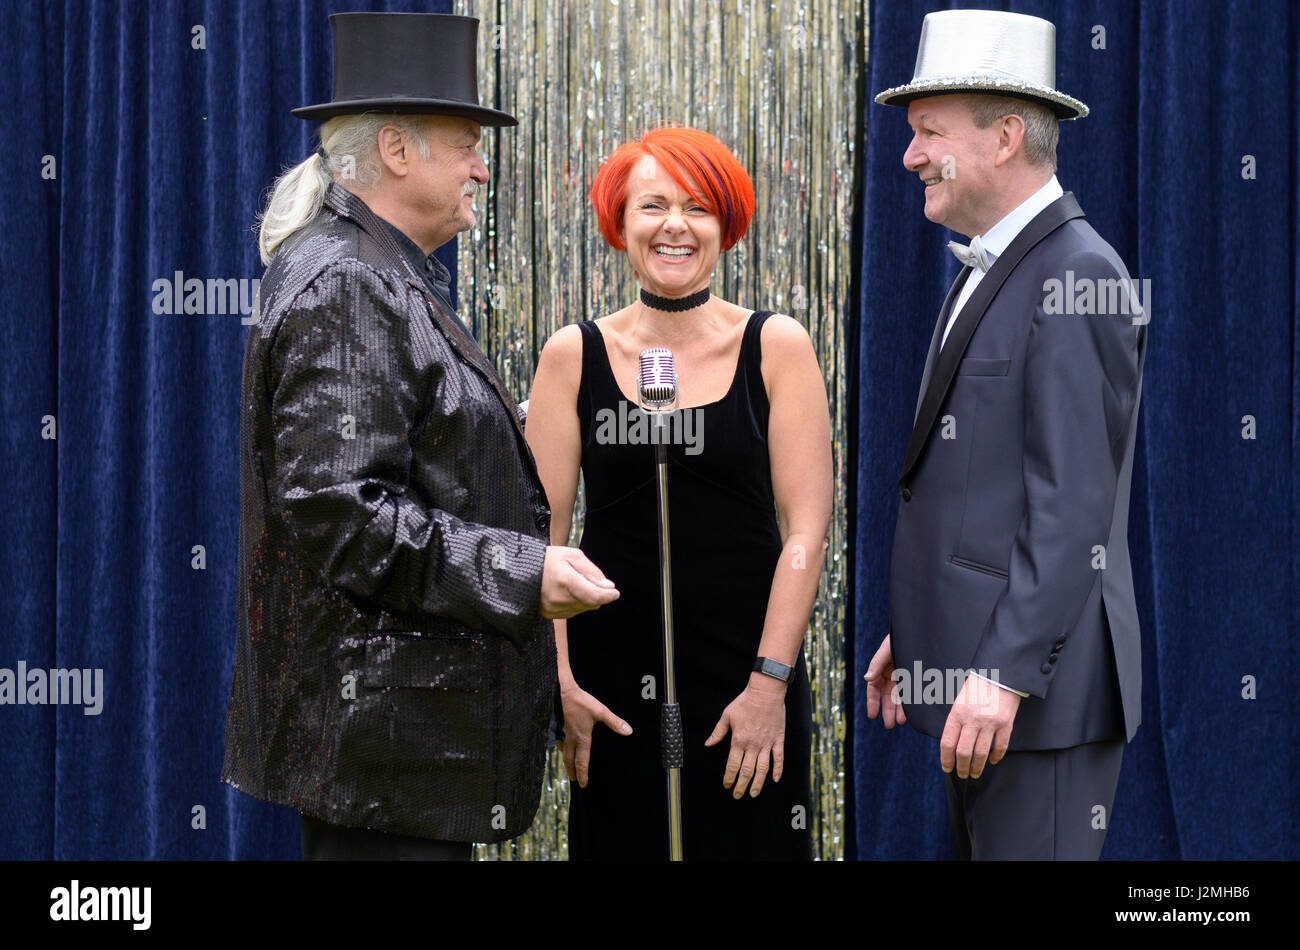 Three lively performers on stage celebrating in front of a microphone with a vivacious redhead woman and two gentlemen with top hats laughing and joki Stock Photo